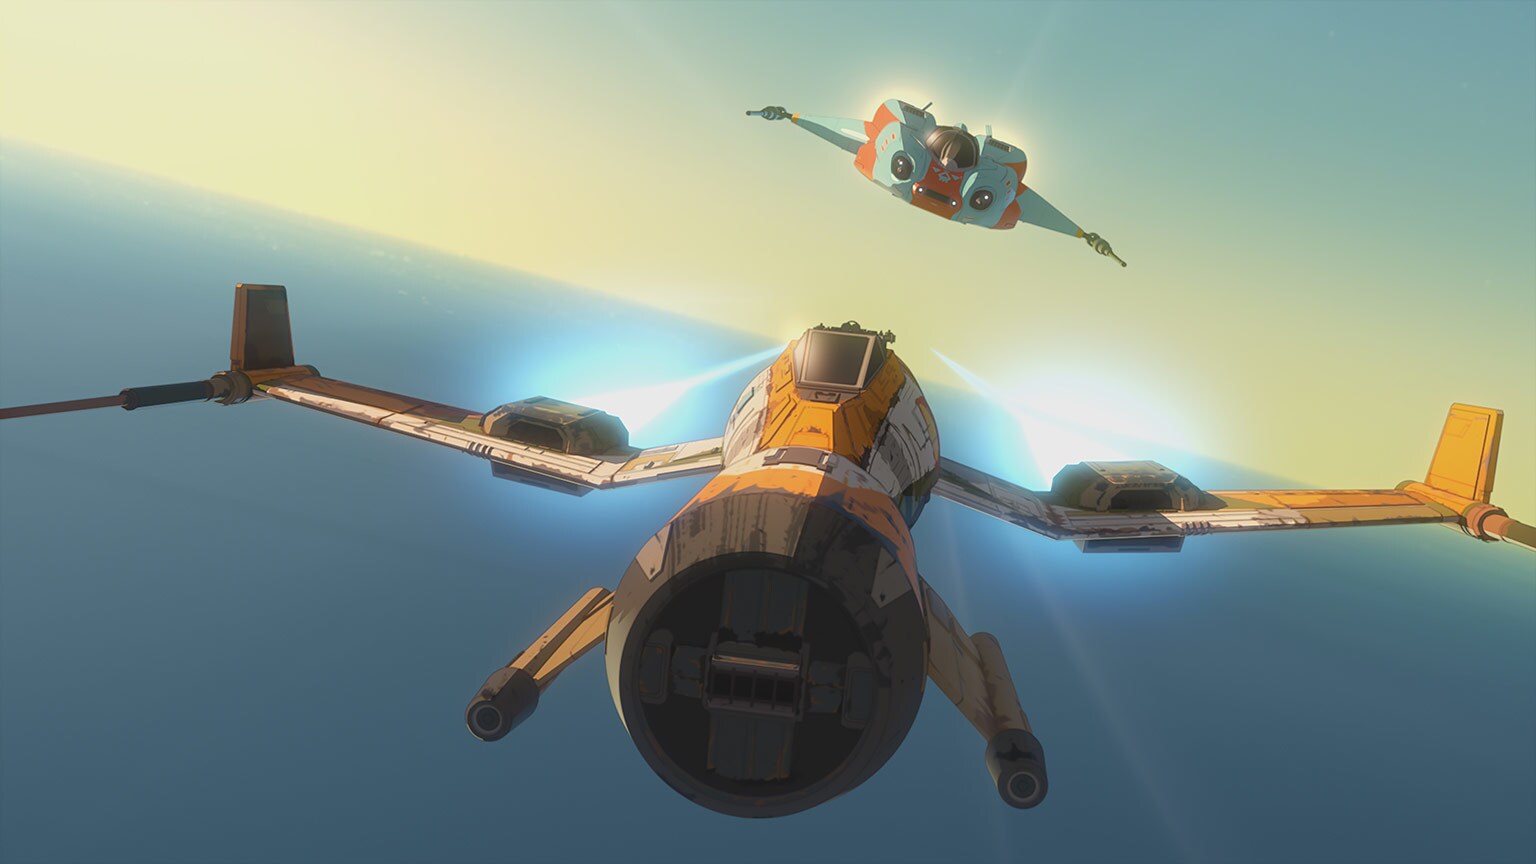 Bucket's List Extra: 8 Fun Facts from "The Recruit" - Star Wars Resistance